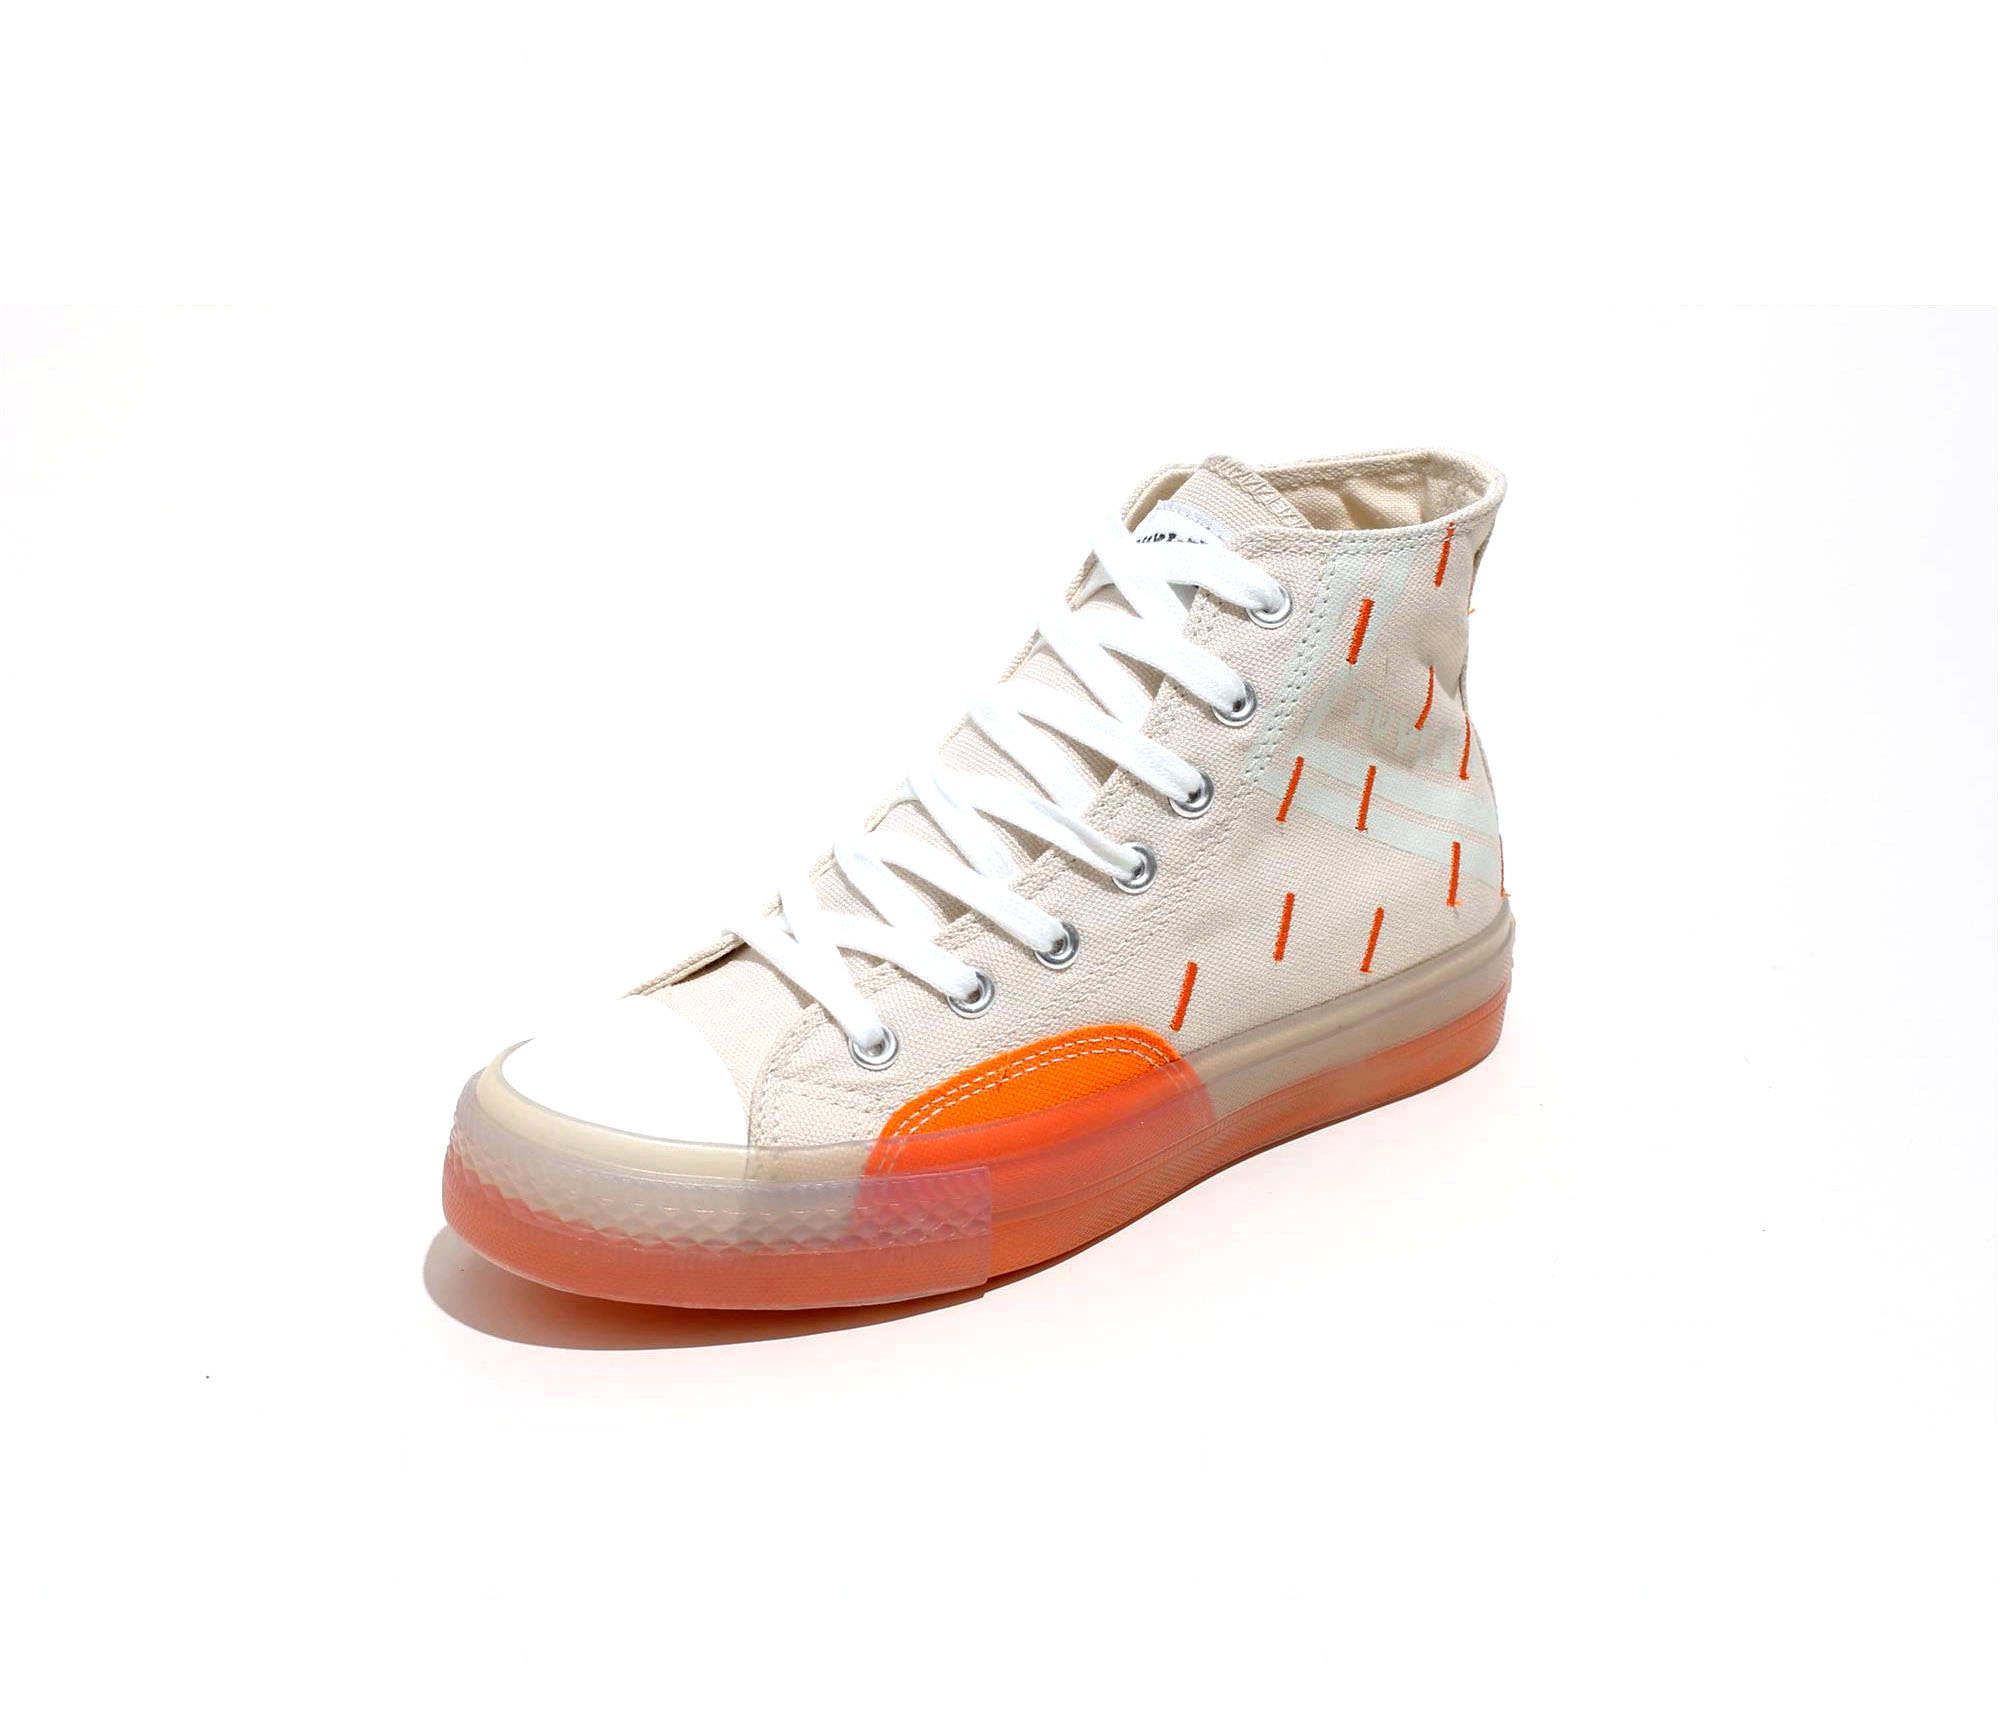 Classic Canvas Shoes High-top Sneakers Transparent sole